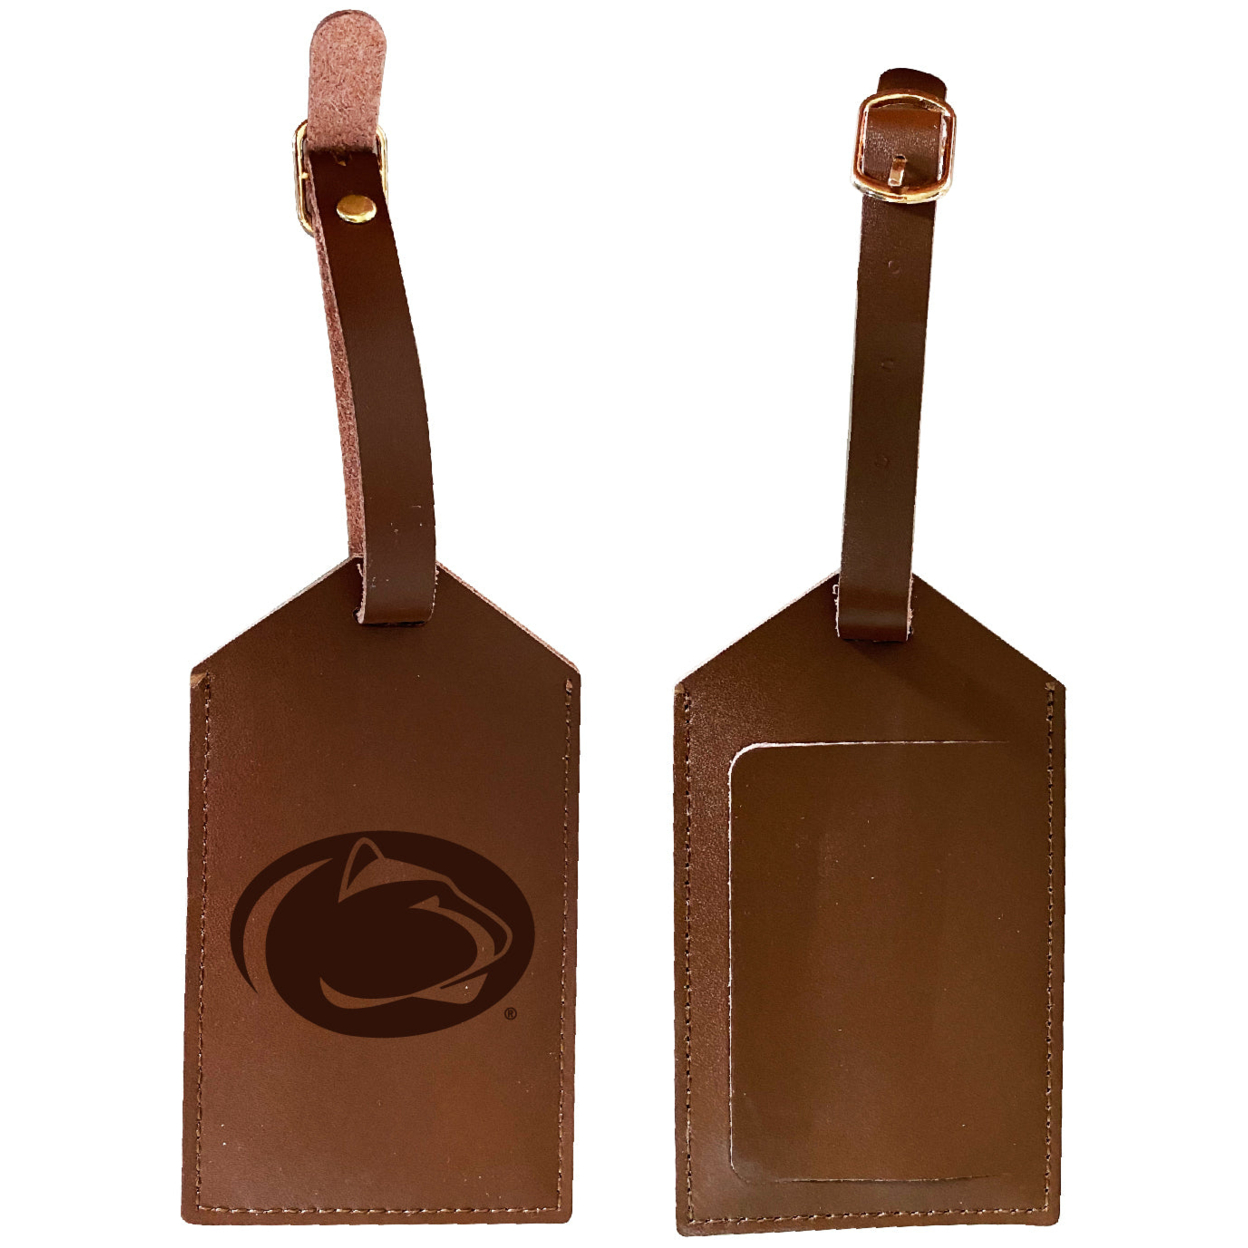 Penn State Nittany Lions Leather Luggage Tag Engraved